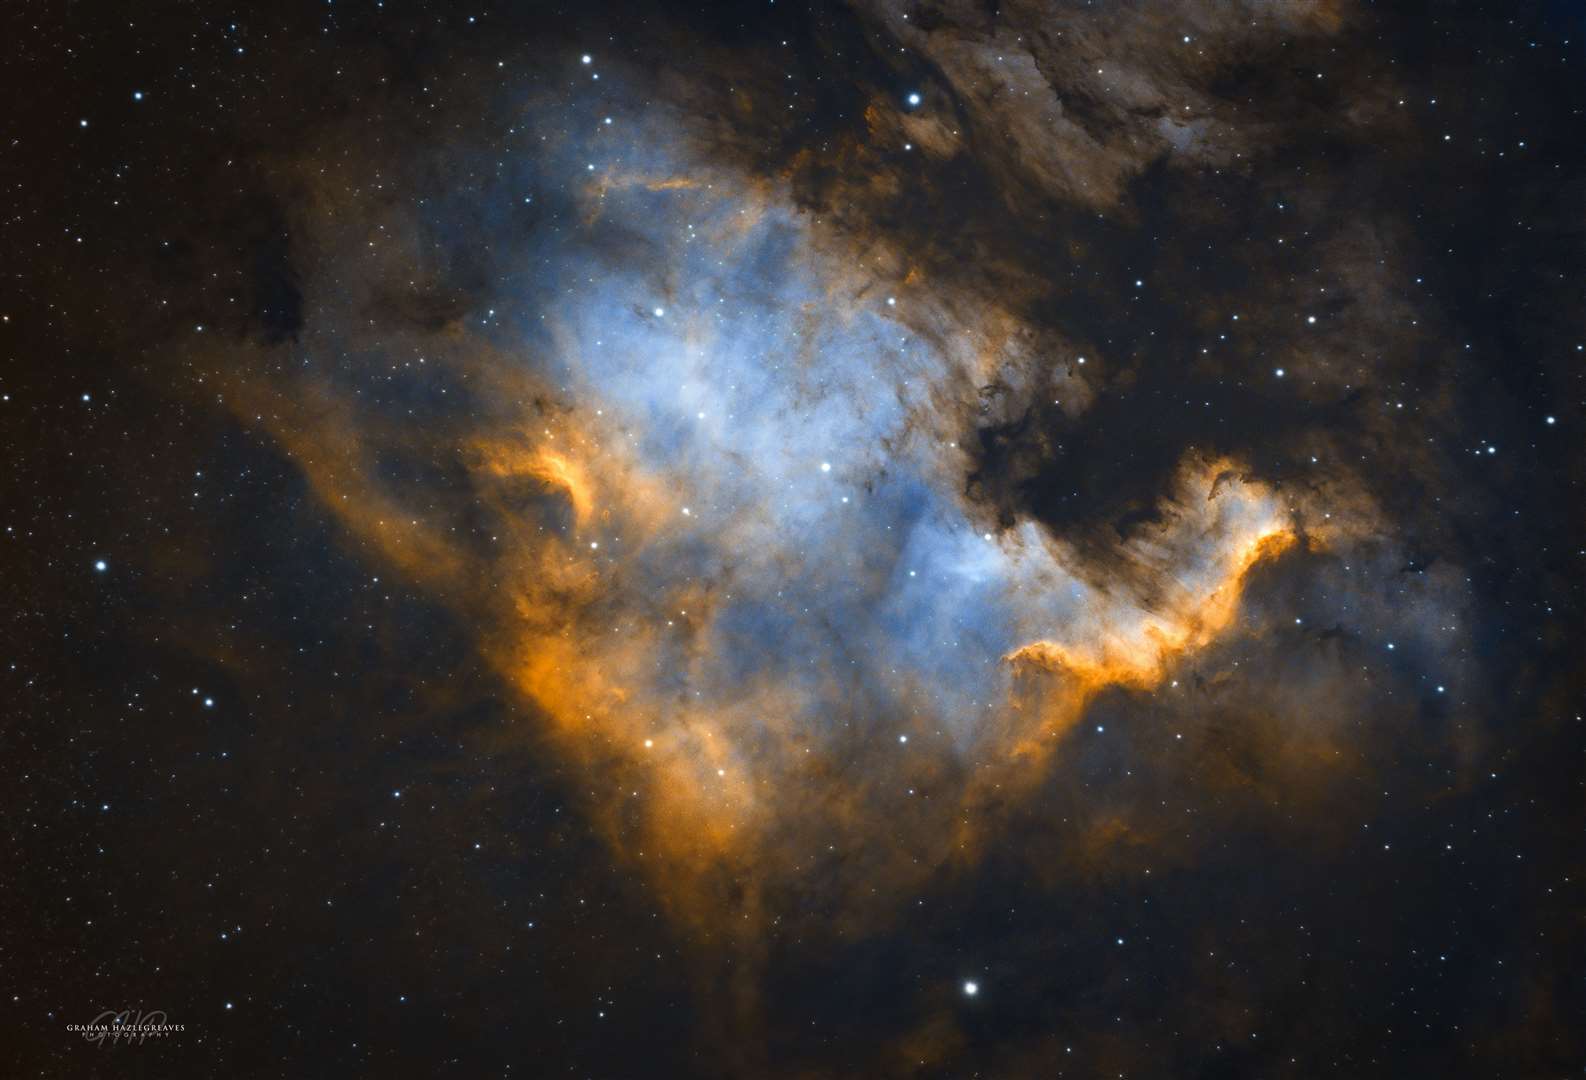 The North America Nebula (NGC7000) is an emission nebula located in the constellation of Cygnus (The Swan). The nebula resembles the shape of the North America Continent. The nebula is some 2,590 light years distant, 90 light years north to south and 140 light years across.